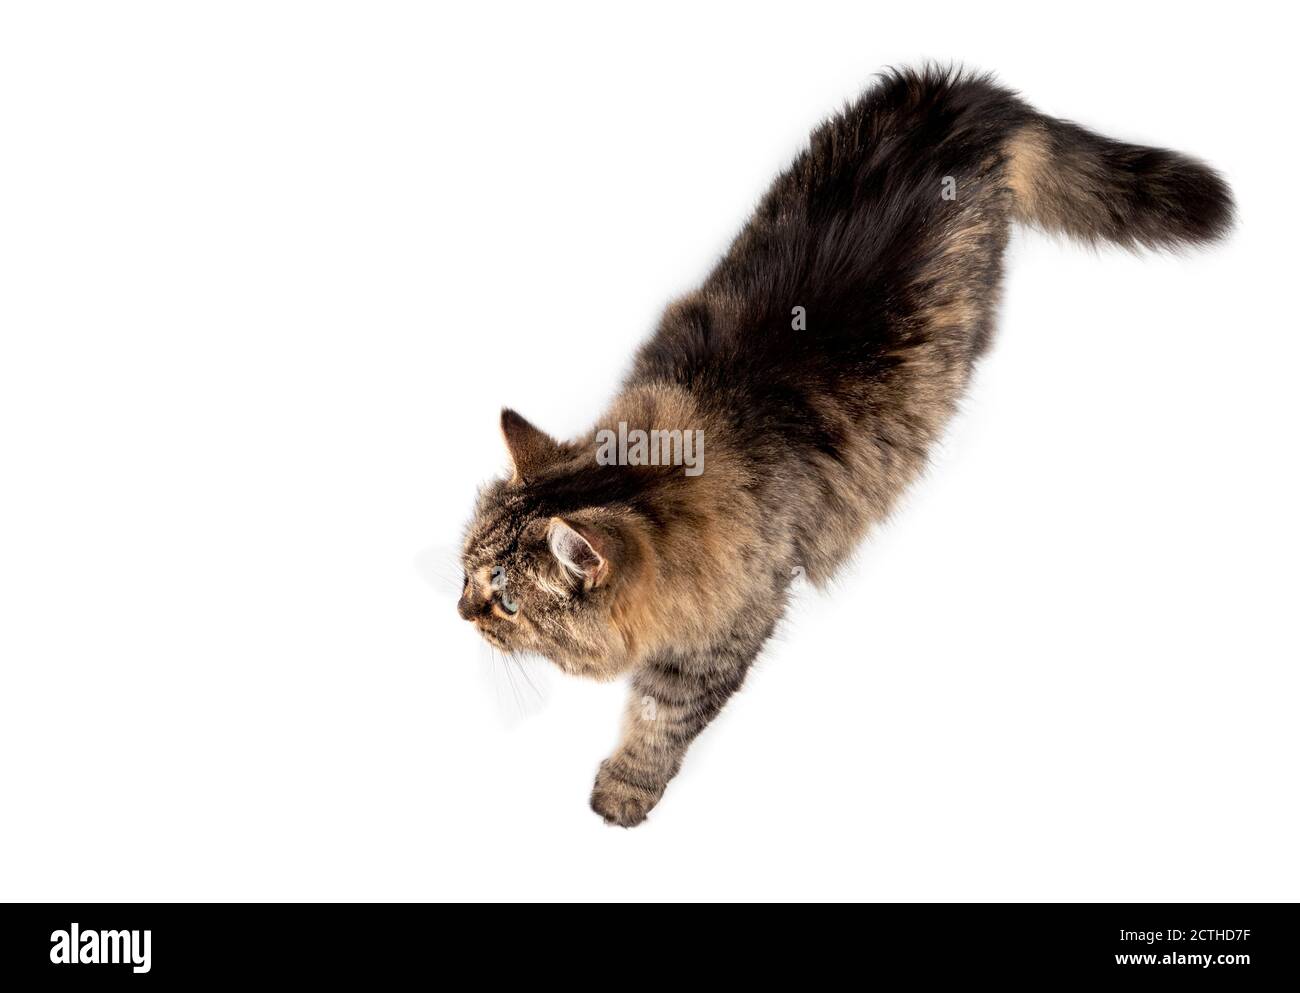 Top view of a cat walking relaxed from right to left. Full body of long hair female tabby senior cat (14 years) with one paw to the front. Isolated. Stock Photo